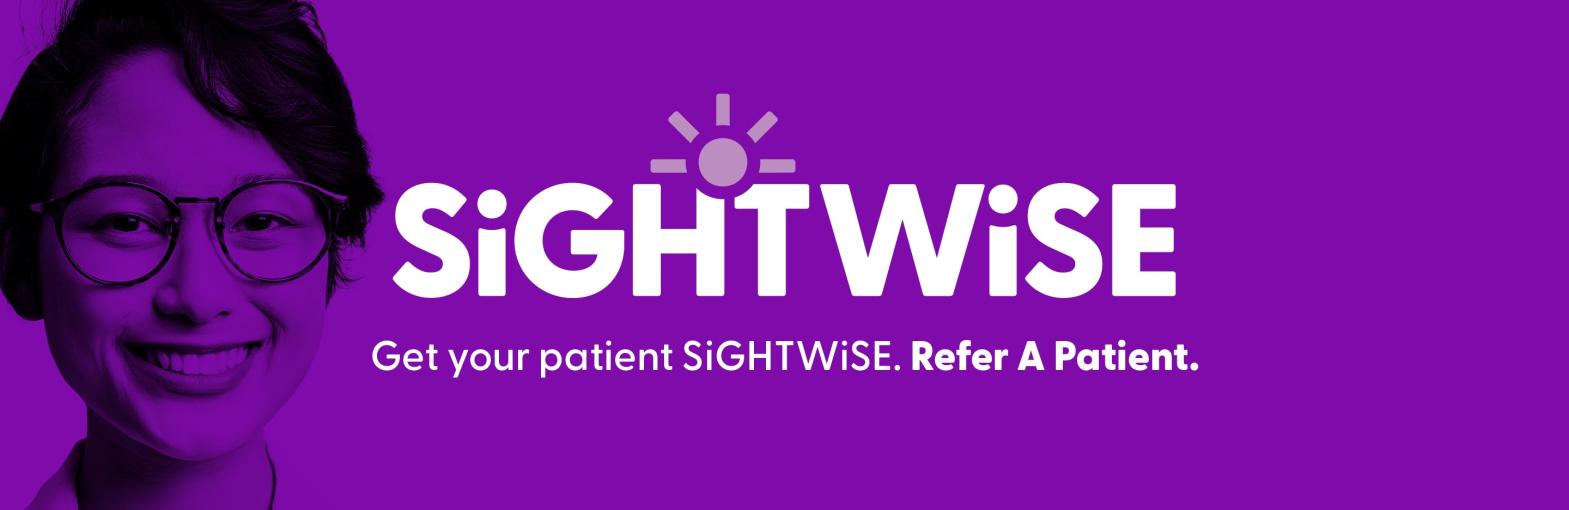 Get your patient SiGHTWiSE. Refer a Patient